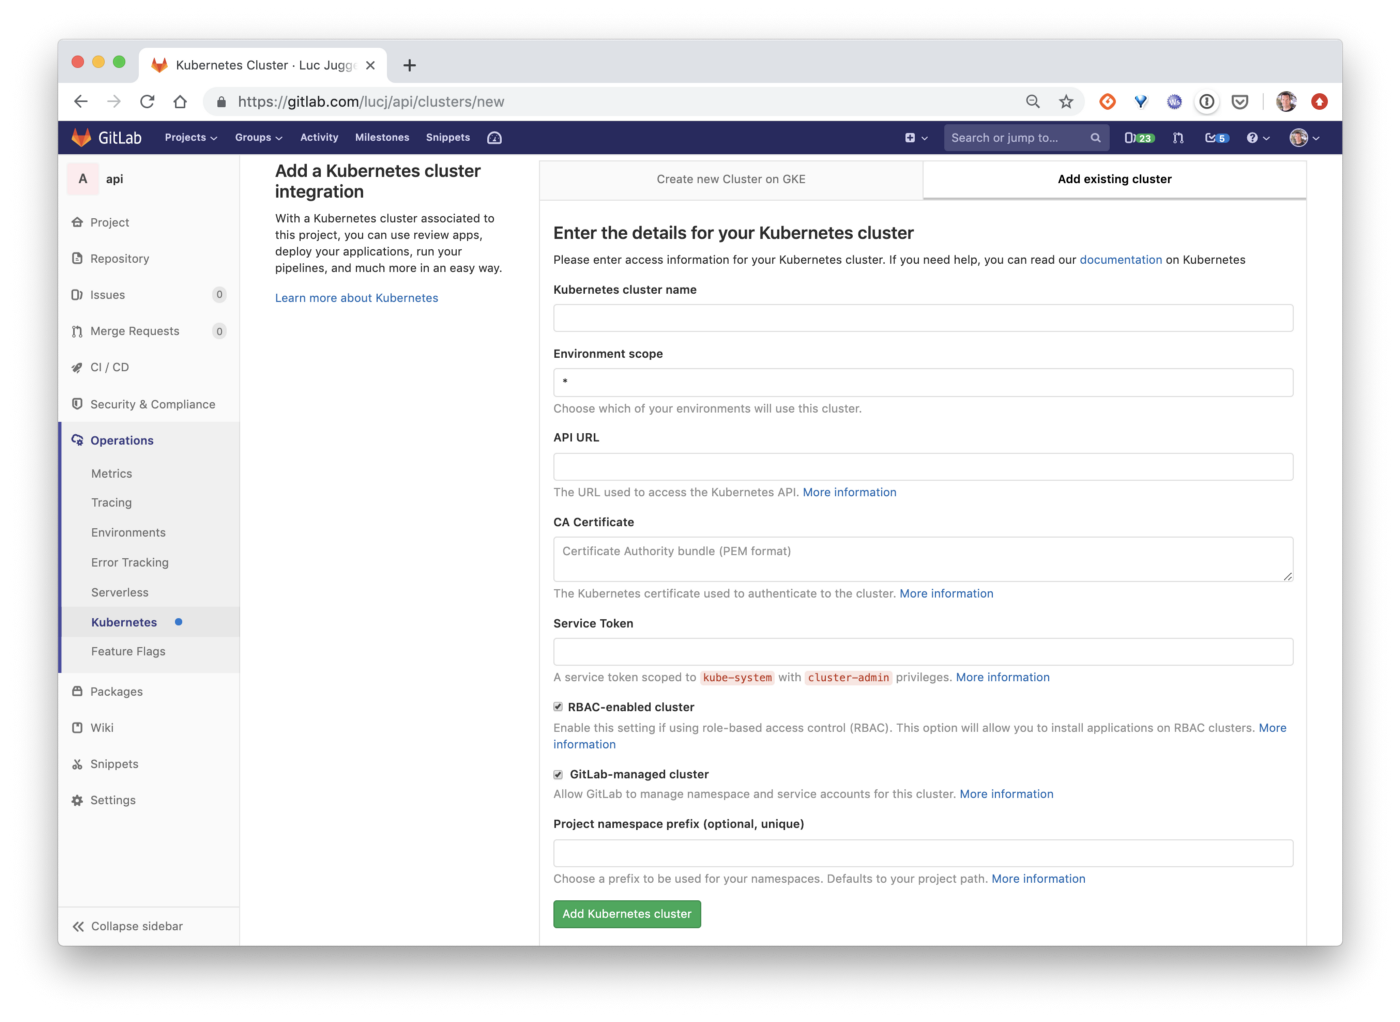 content/wechat/articles/2020/05/2020-05-06-using-a-k3s-kubernetes-cluster-for-your-gitlab-project/add-existing-cluster.png